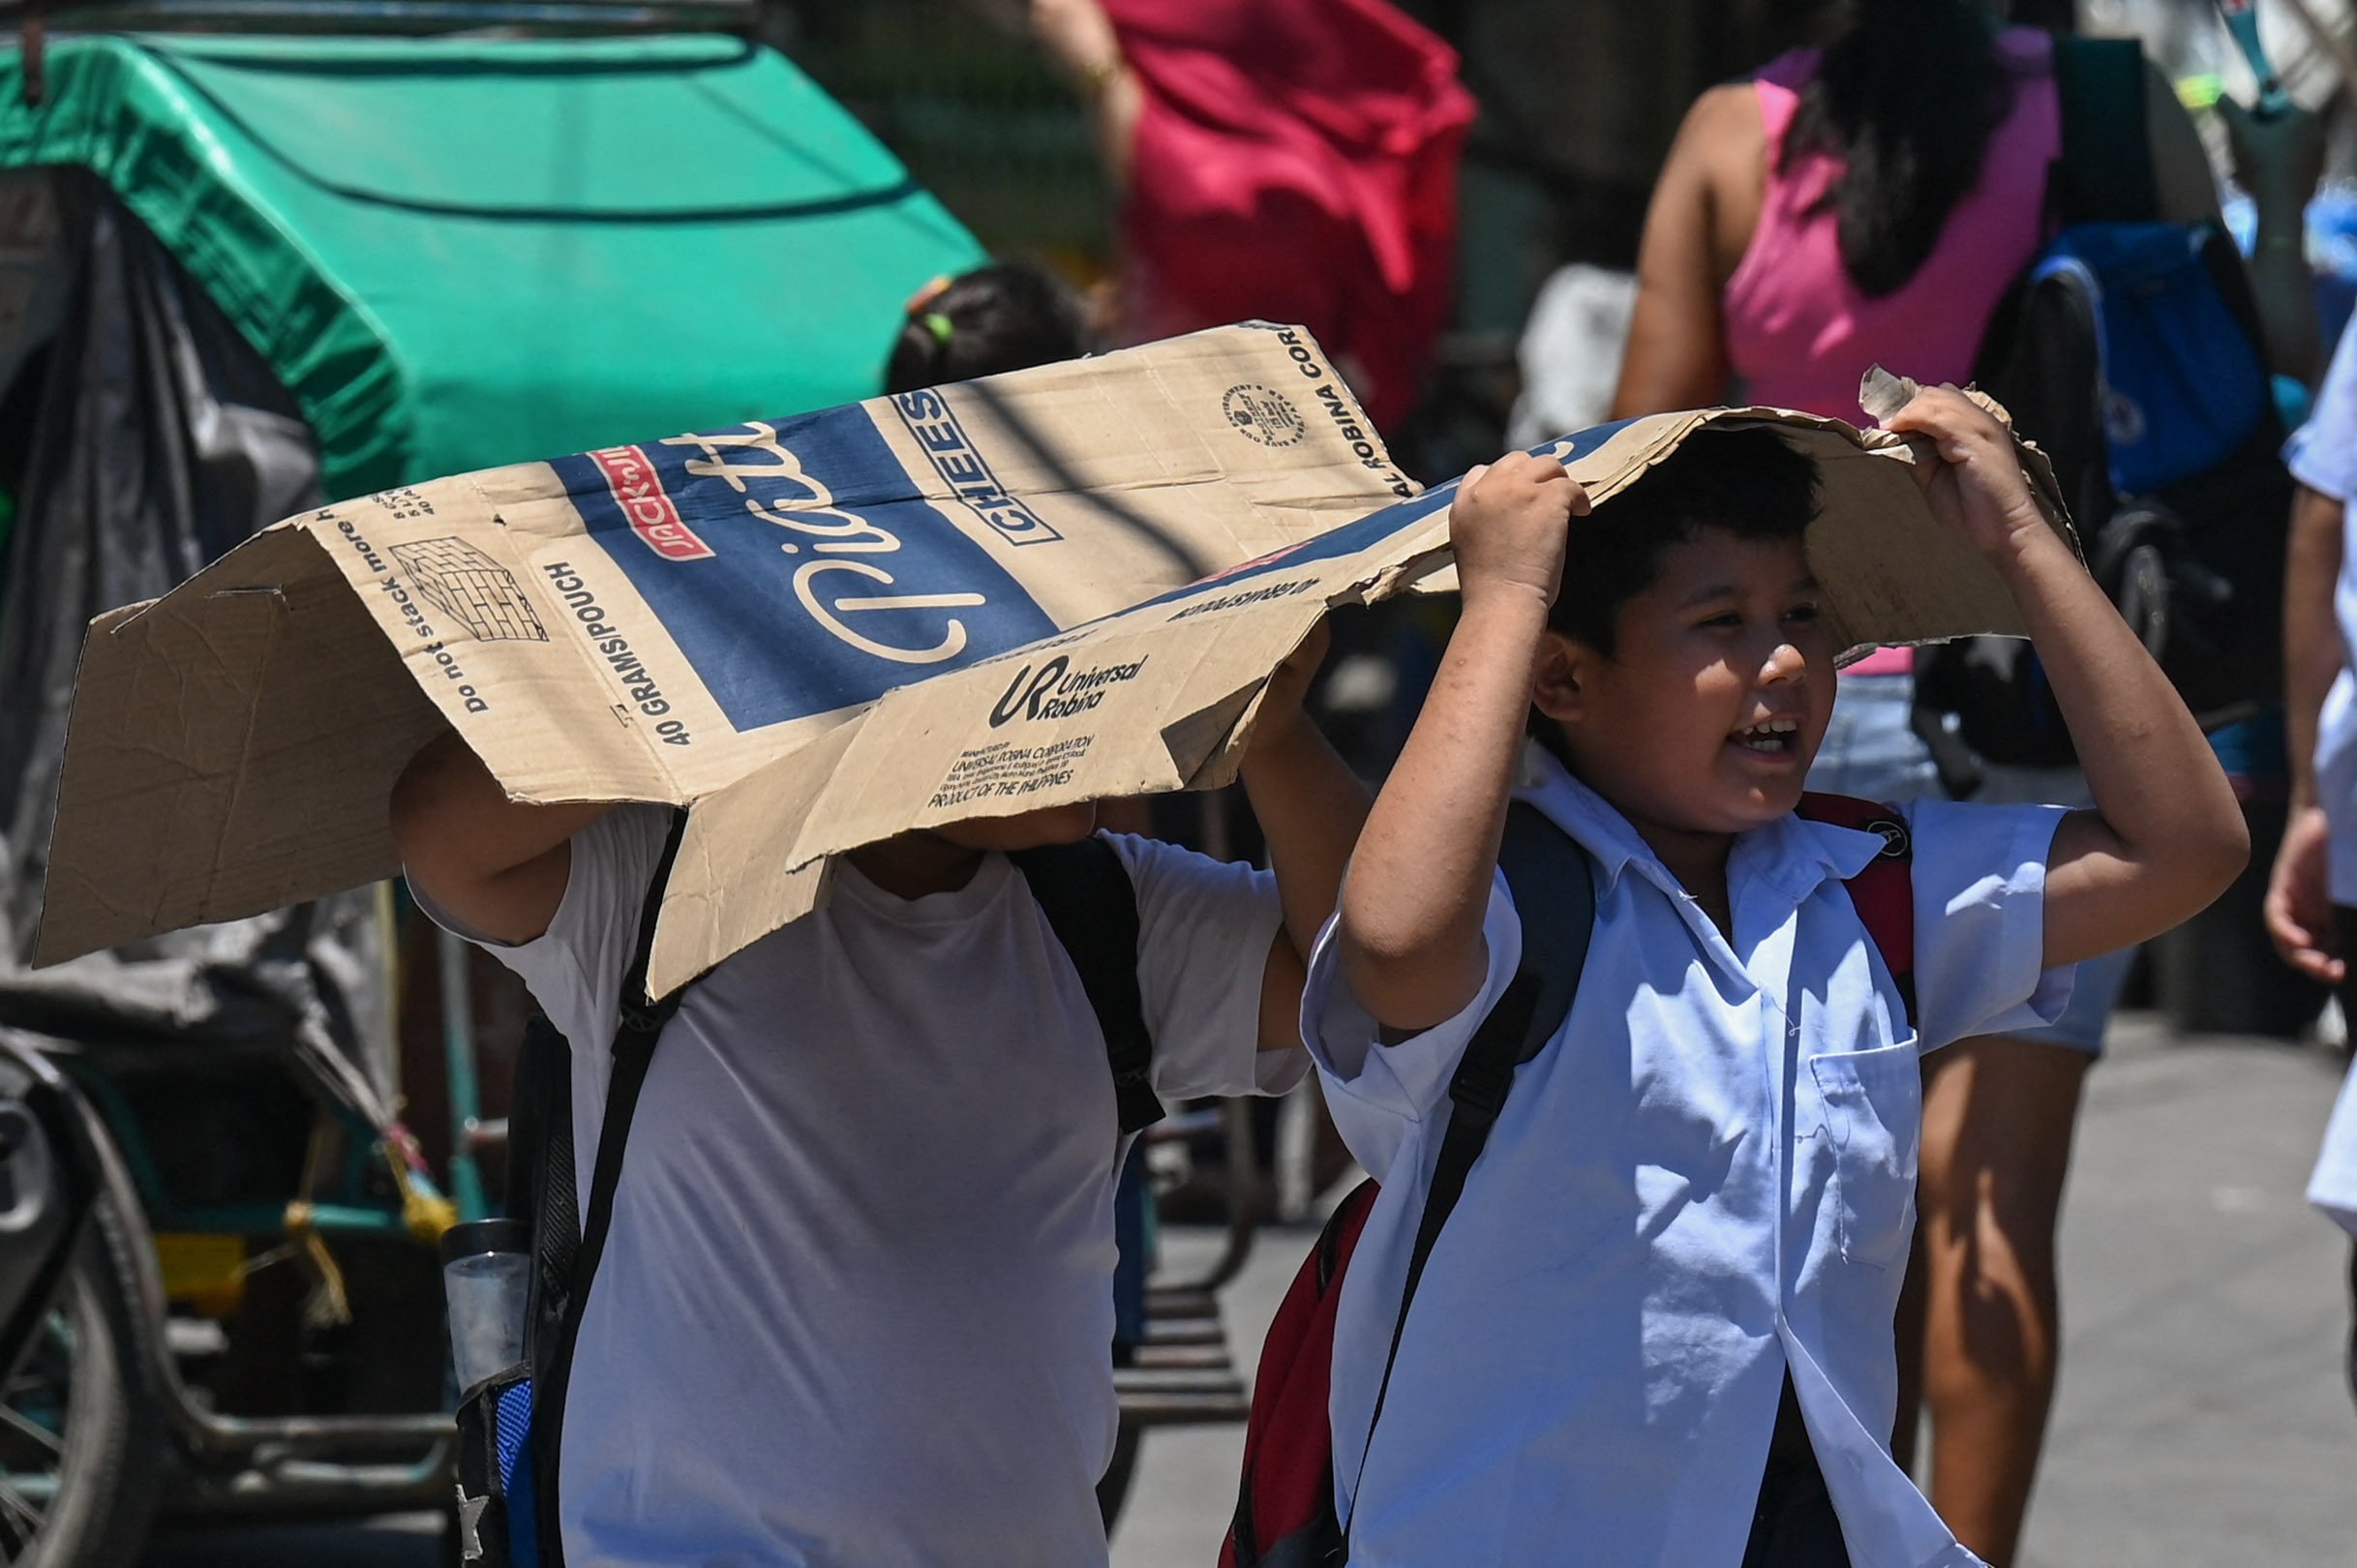 Students use a cardboard to protect themselves from the sun during a hot day in Manila. The Philippines announced it will halt in-person classes at public schools amid a crippling heat wave. Photo: AFP